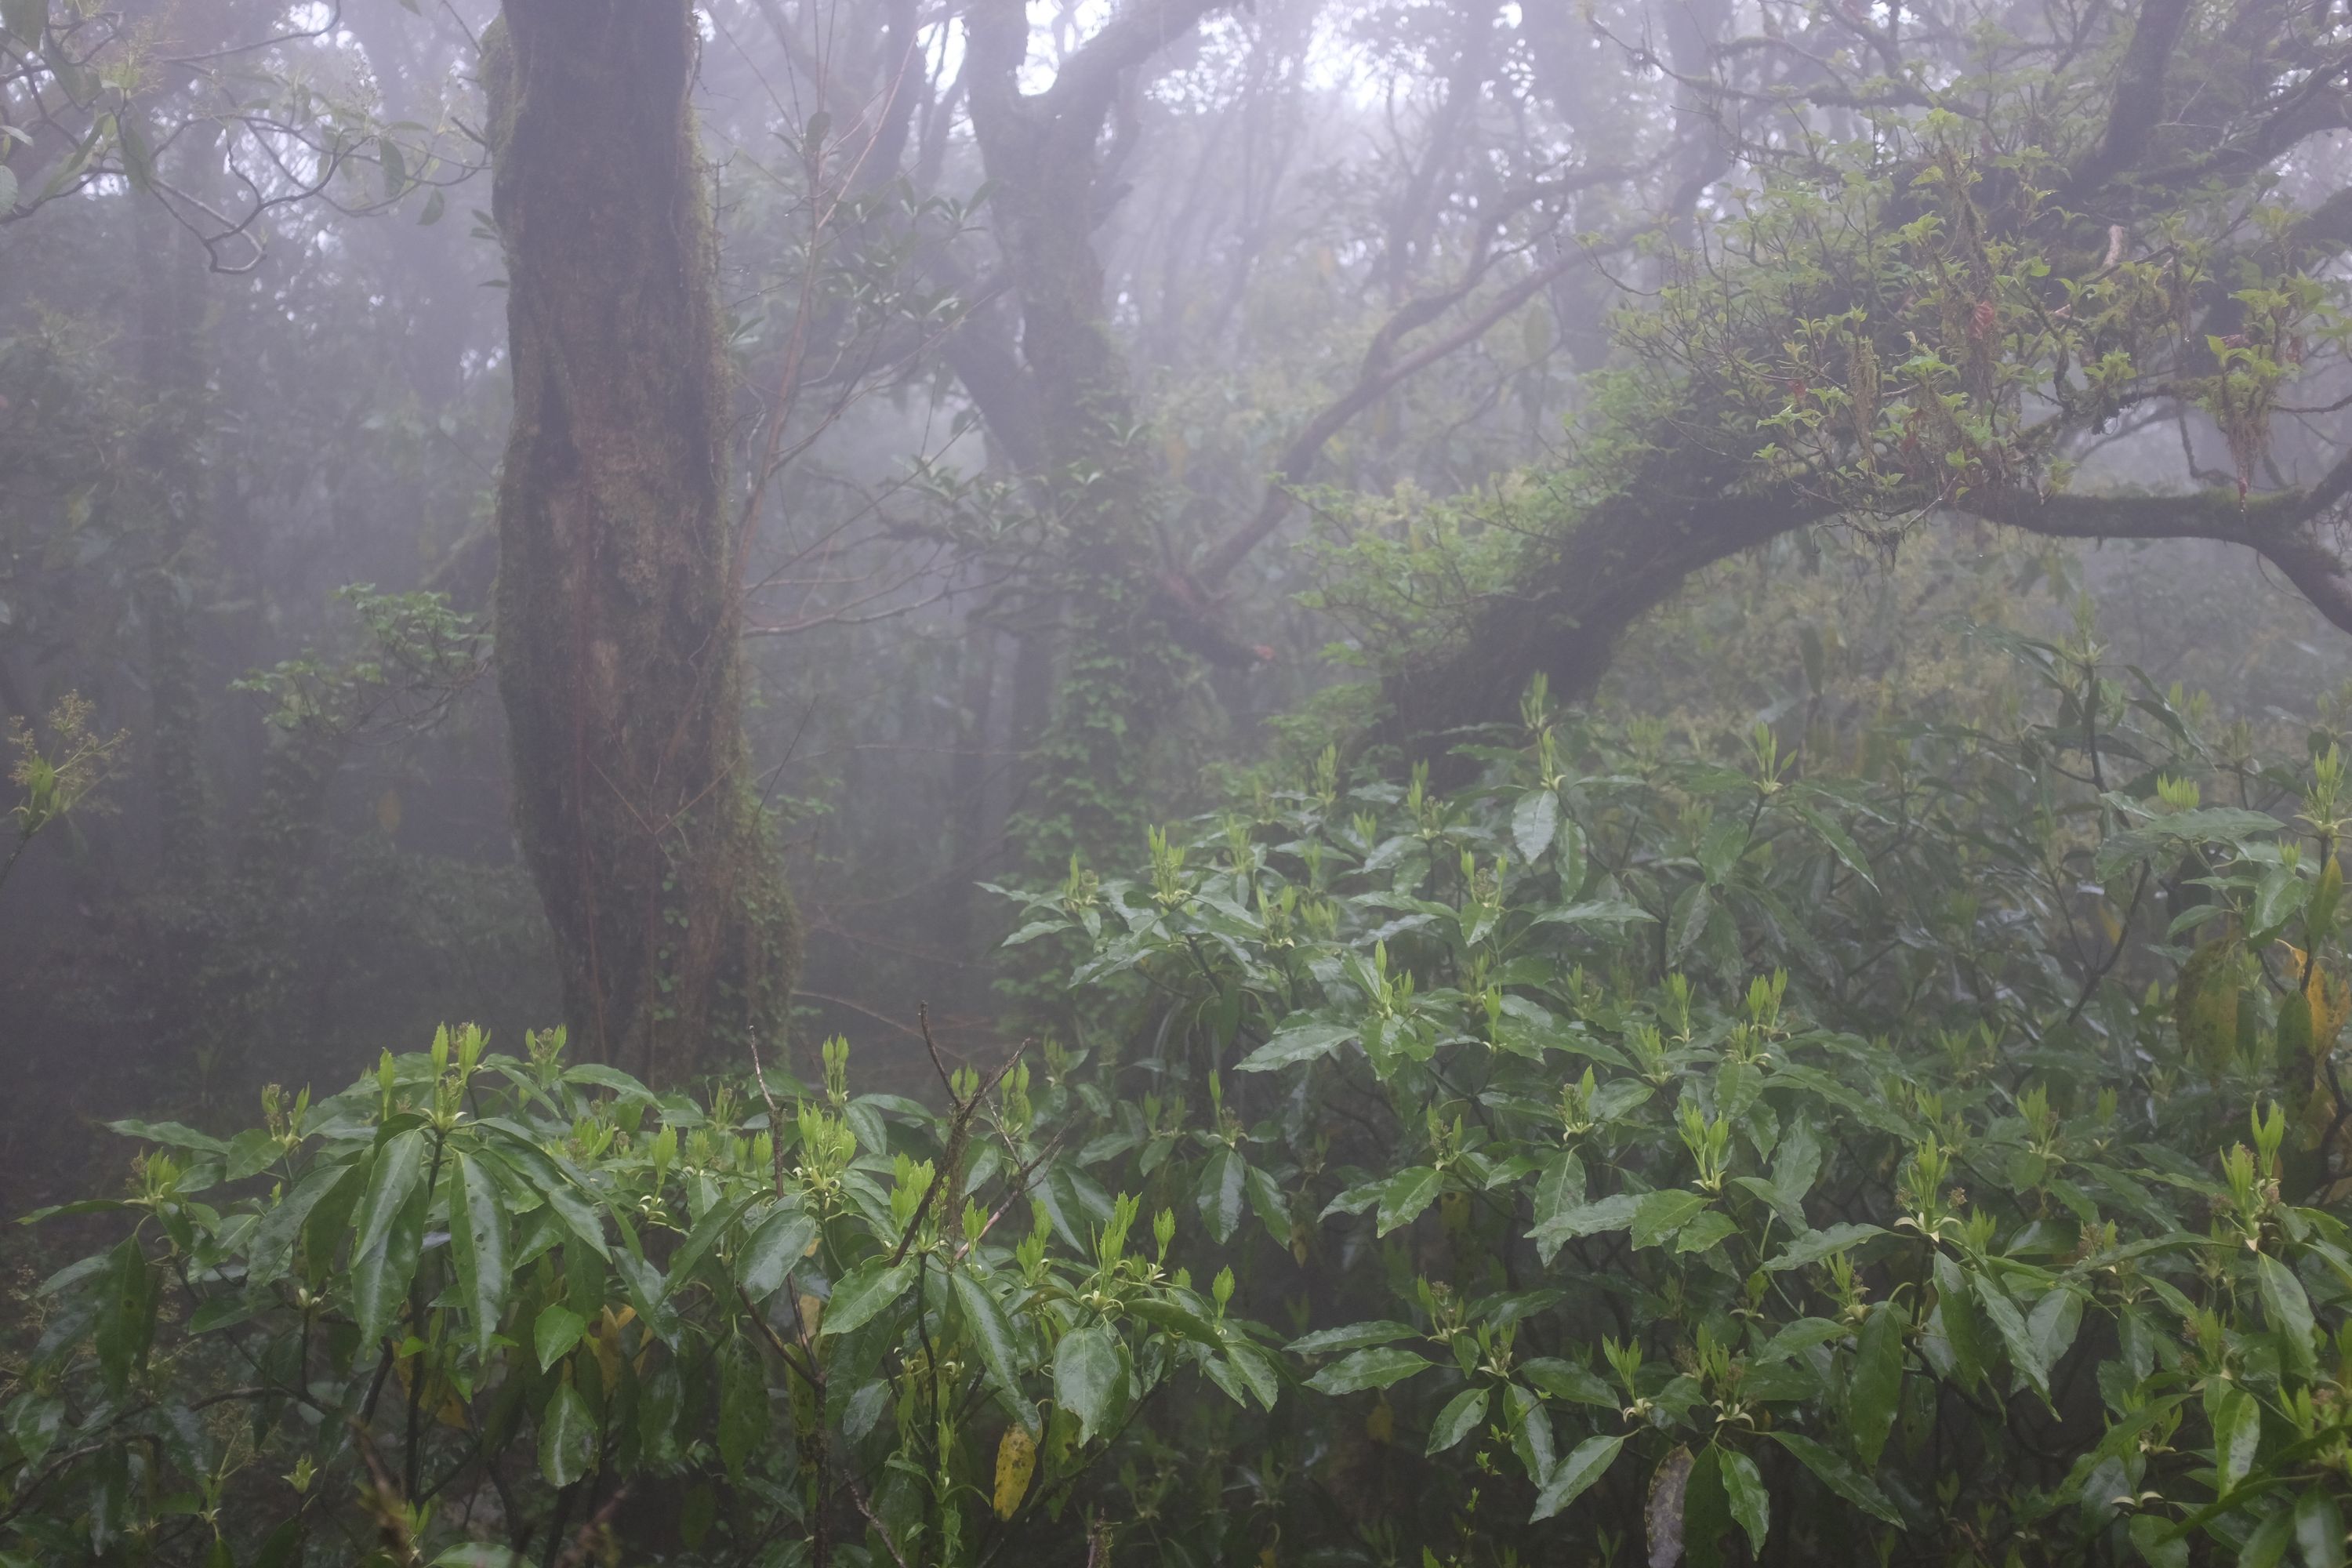 A foggy, subtropical forest, with water dripping from everywhere.